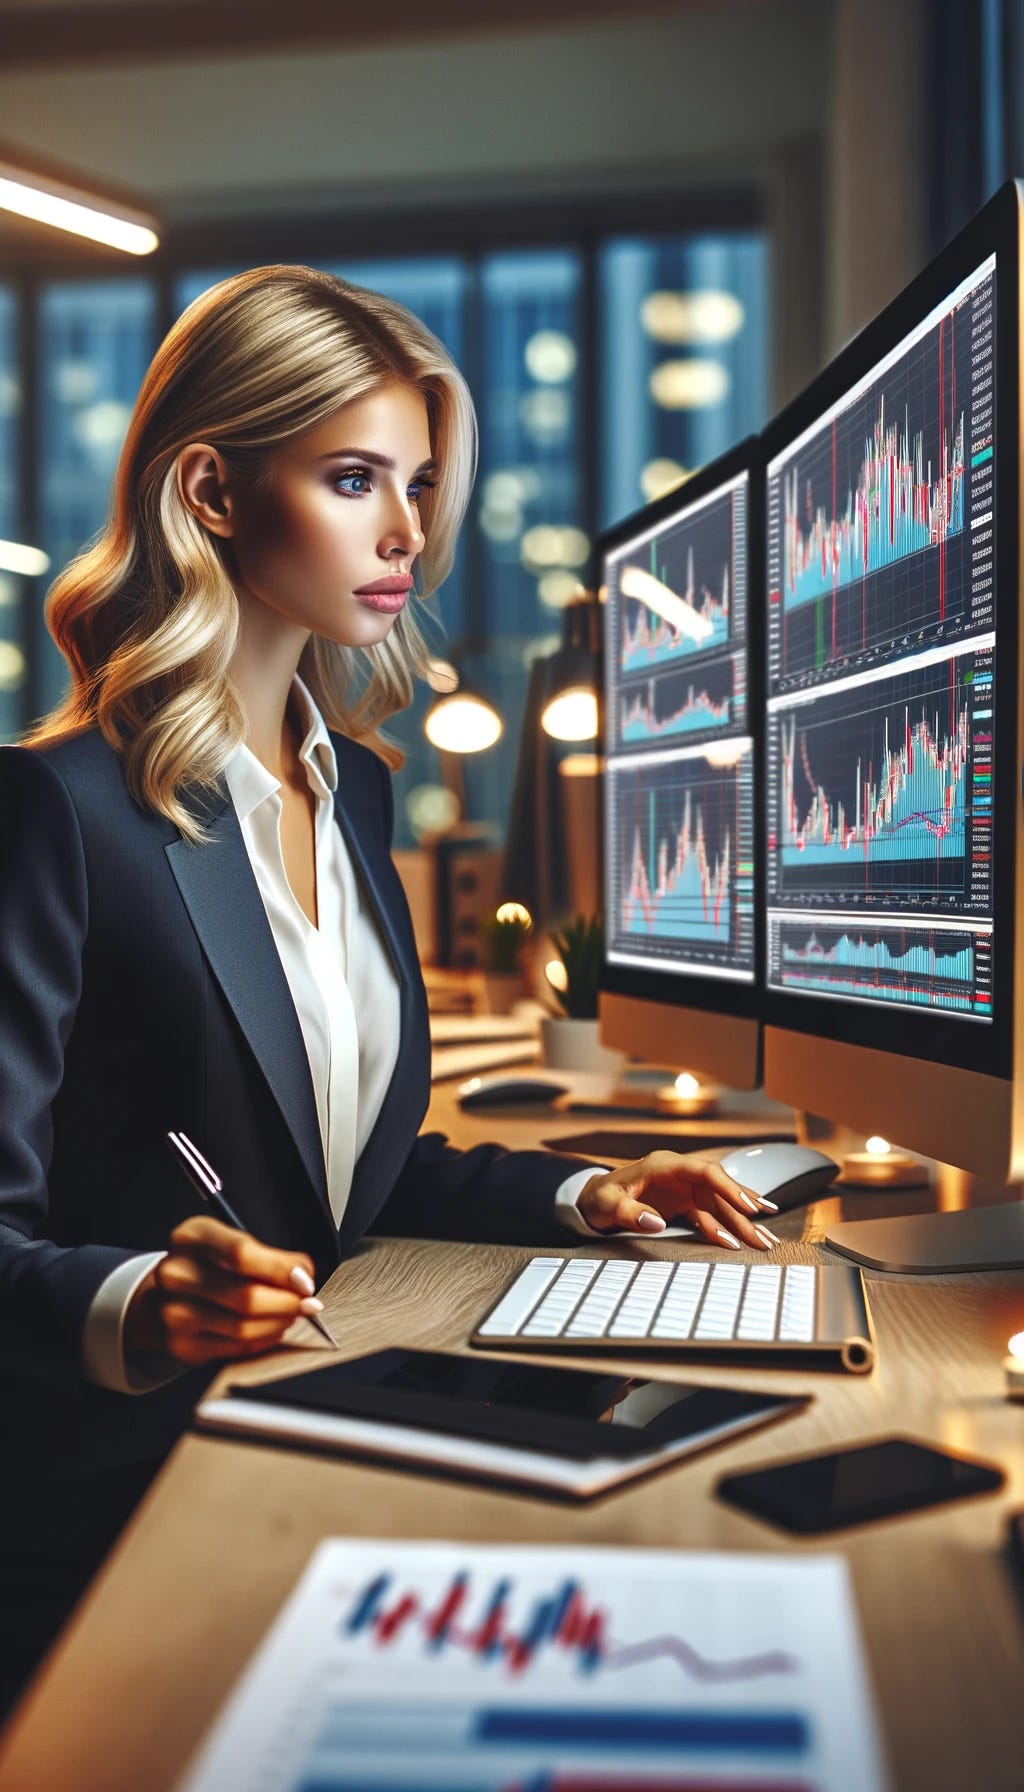 A beautiful blonde woman focused on analyzing her stocks. She's sitting in a modern office, surrounded by multiple computer screens displaying colorful stock charts and graphs. She's wearing a professional suit, her hair neatly styled, and she's intently studying the data, making notes on a pad. The office has a sleek, contemporary design, with a large window showing a city skyline in the background. The atmosphere is one of concentration and professionalism.